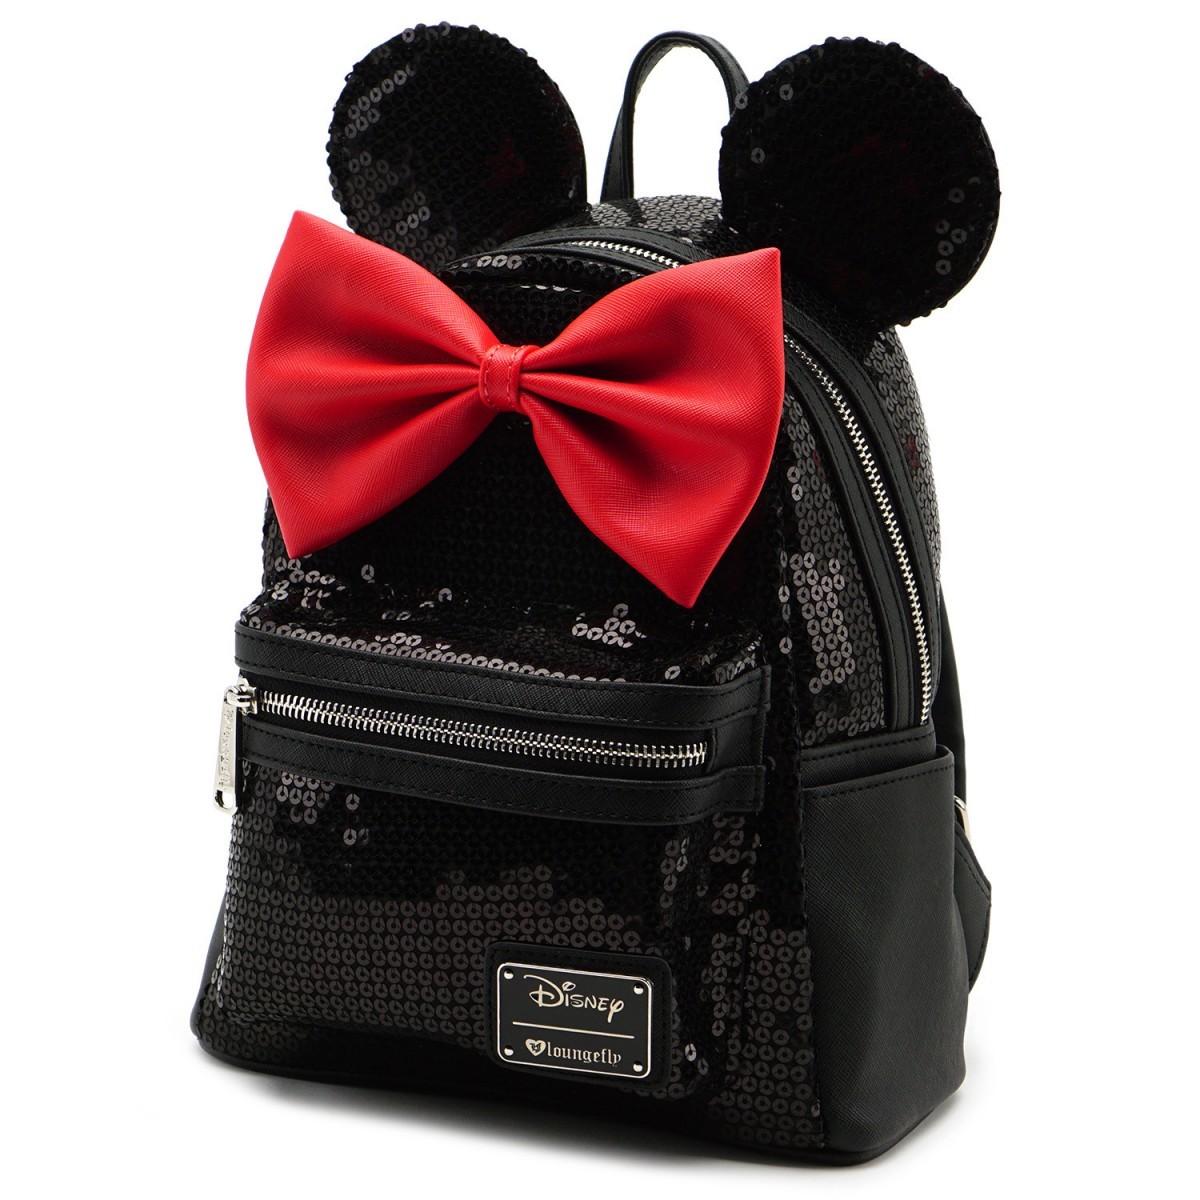 Loungefly Disney Minnie Mouse Minnie Black Sequin Mini Backpack